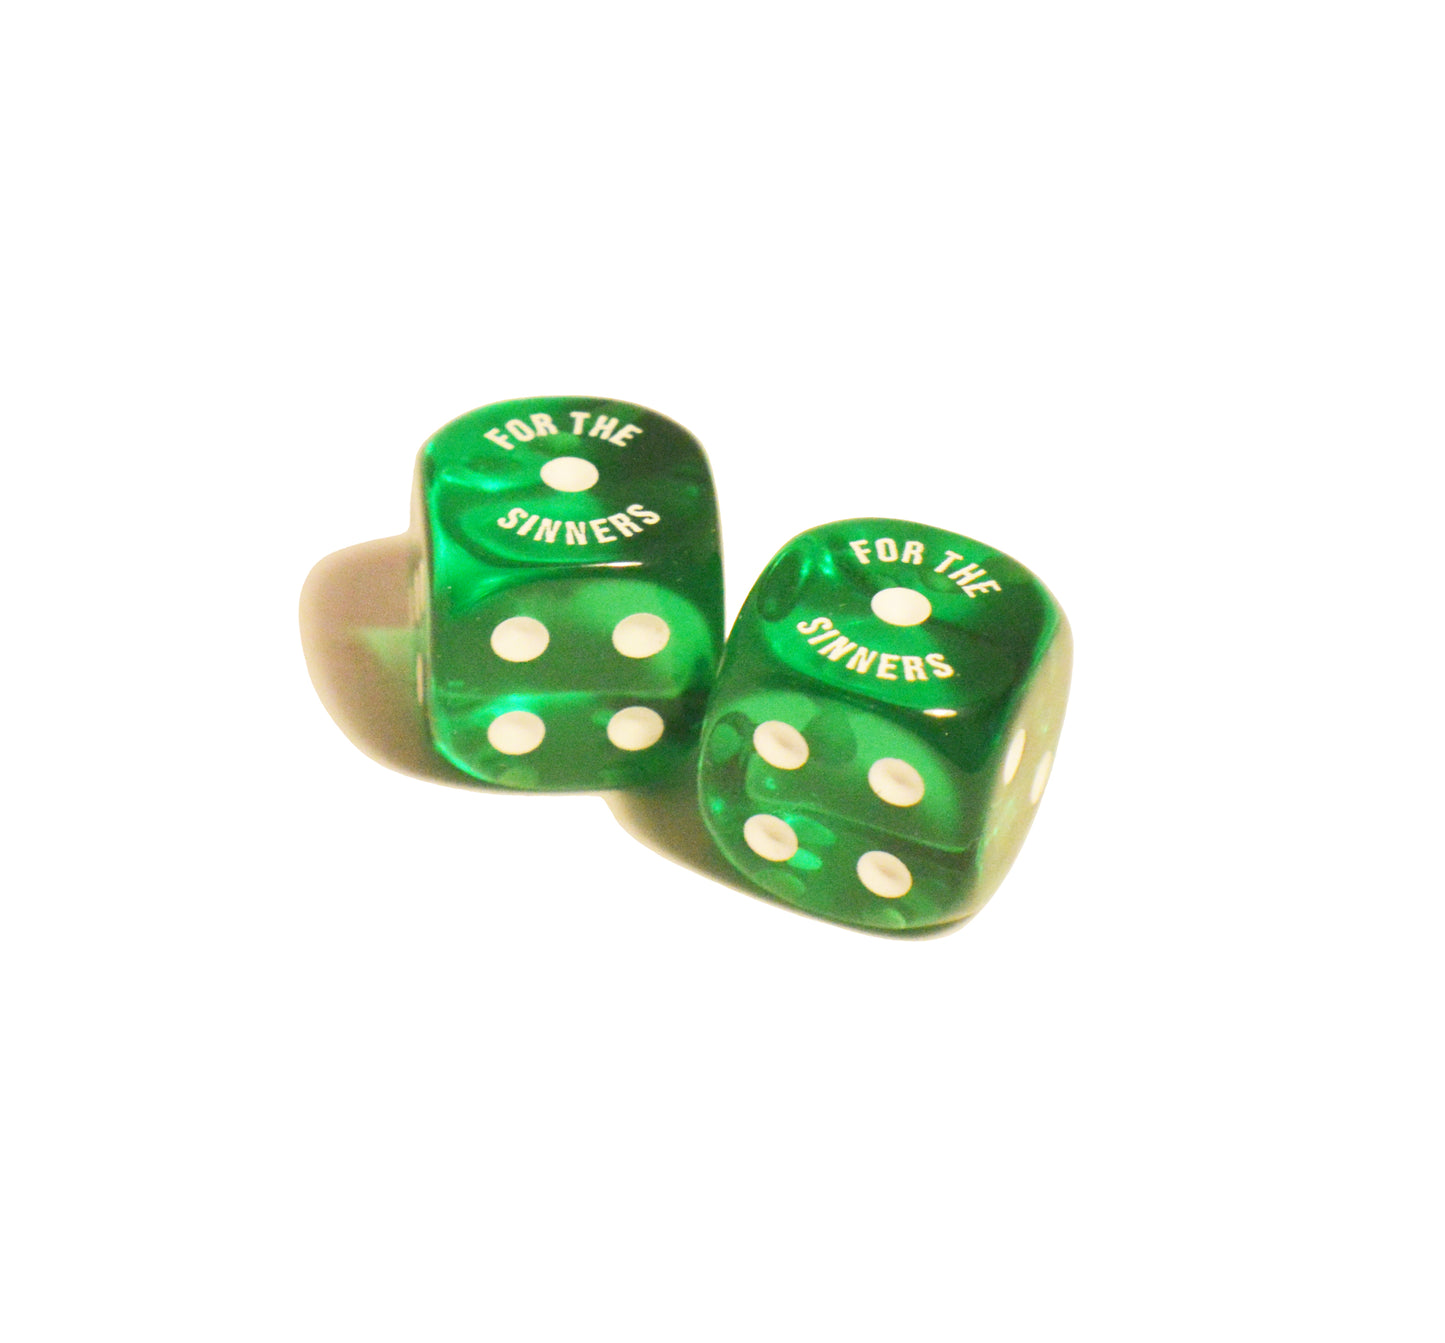 FOR THE SINNERS DICE